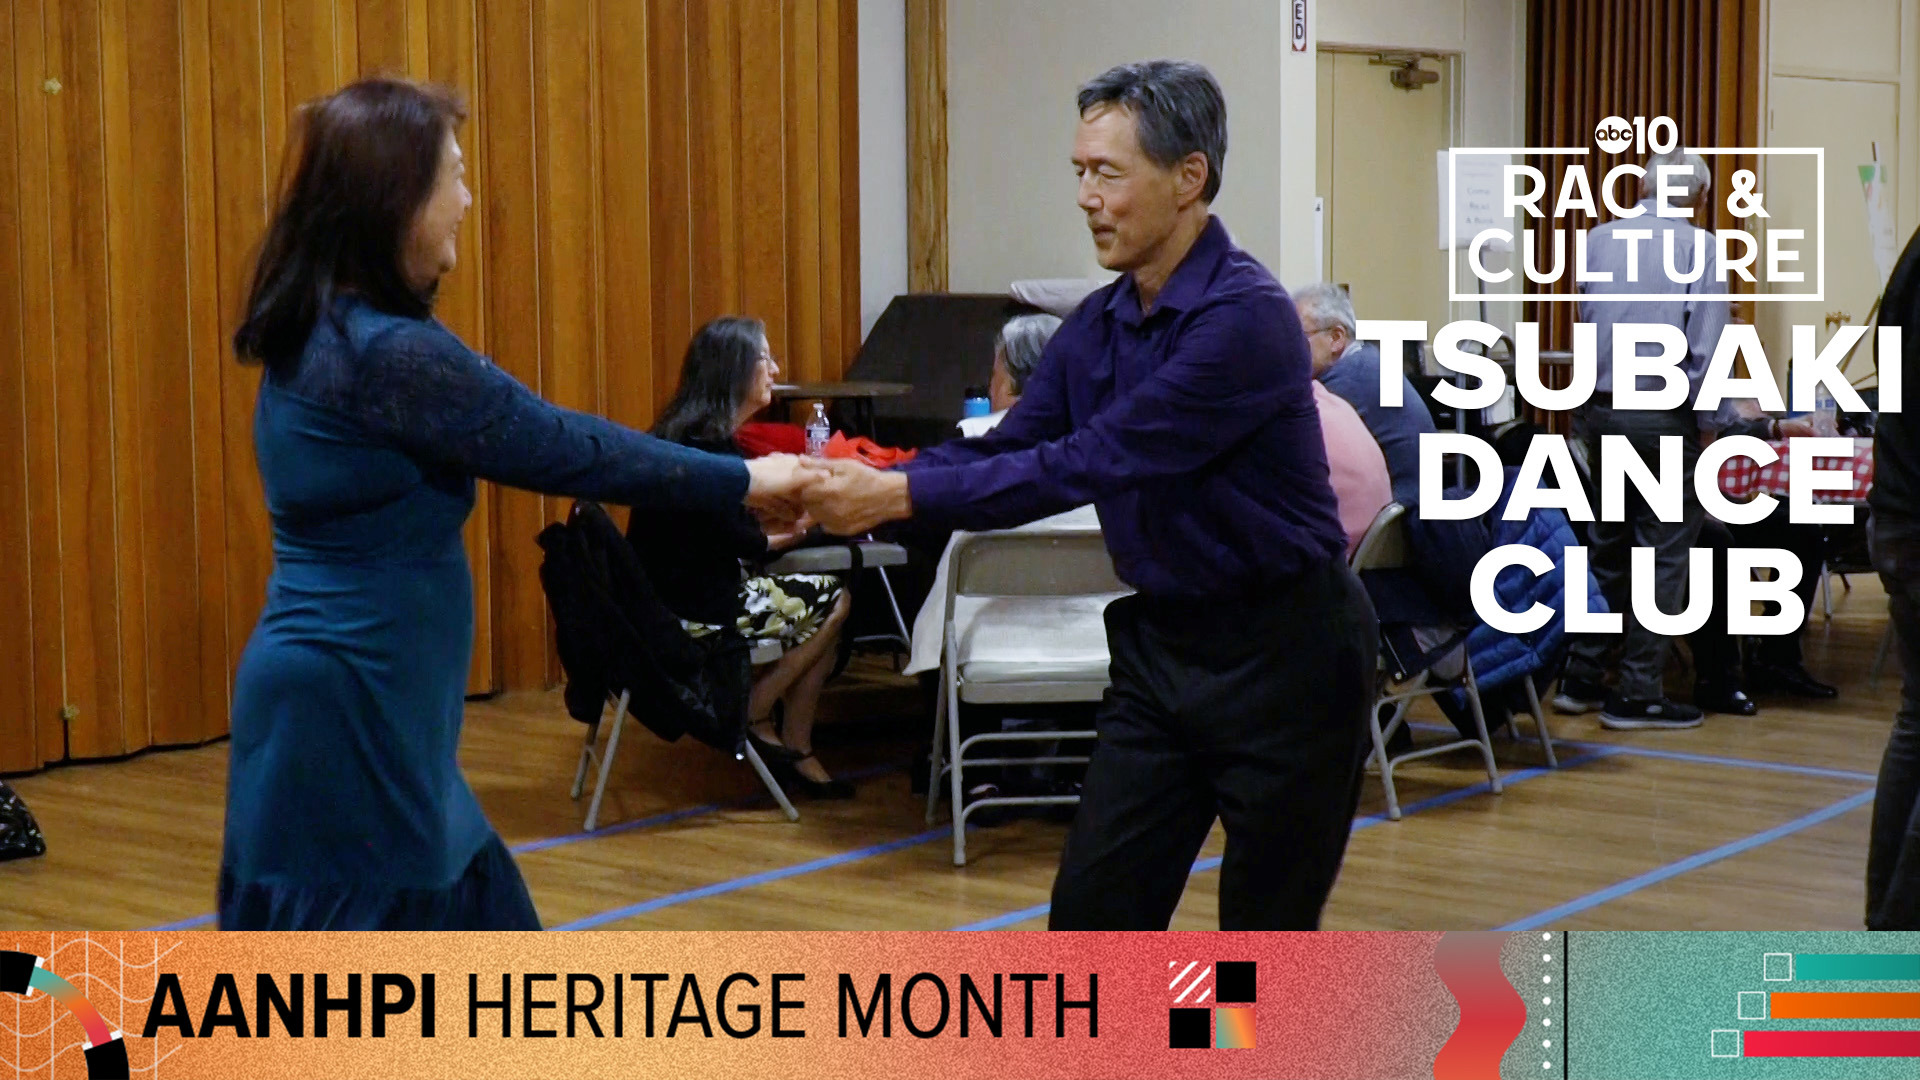 The club was founded in the early '80s in Sacramento. Friendships and a passion for ballroom have kept the dance floor hopping.